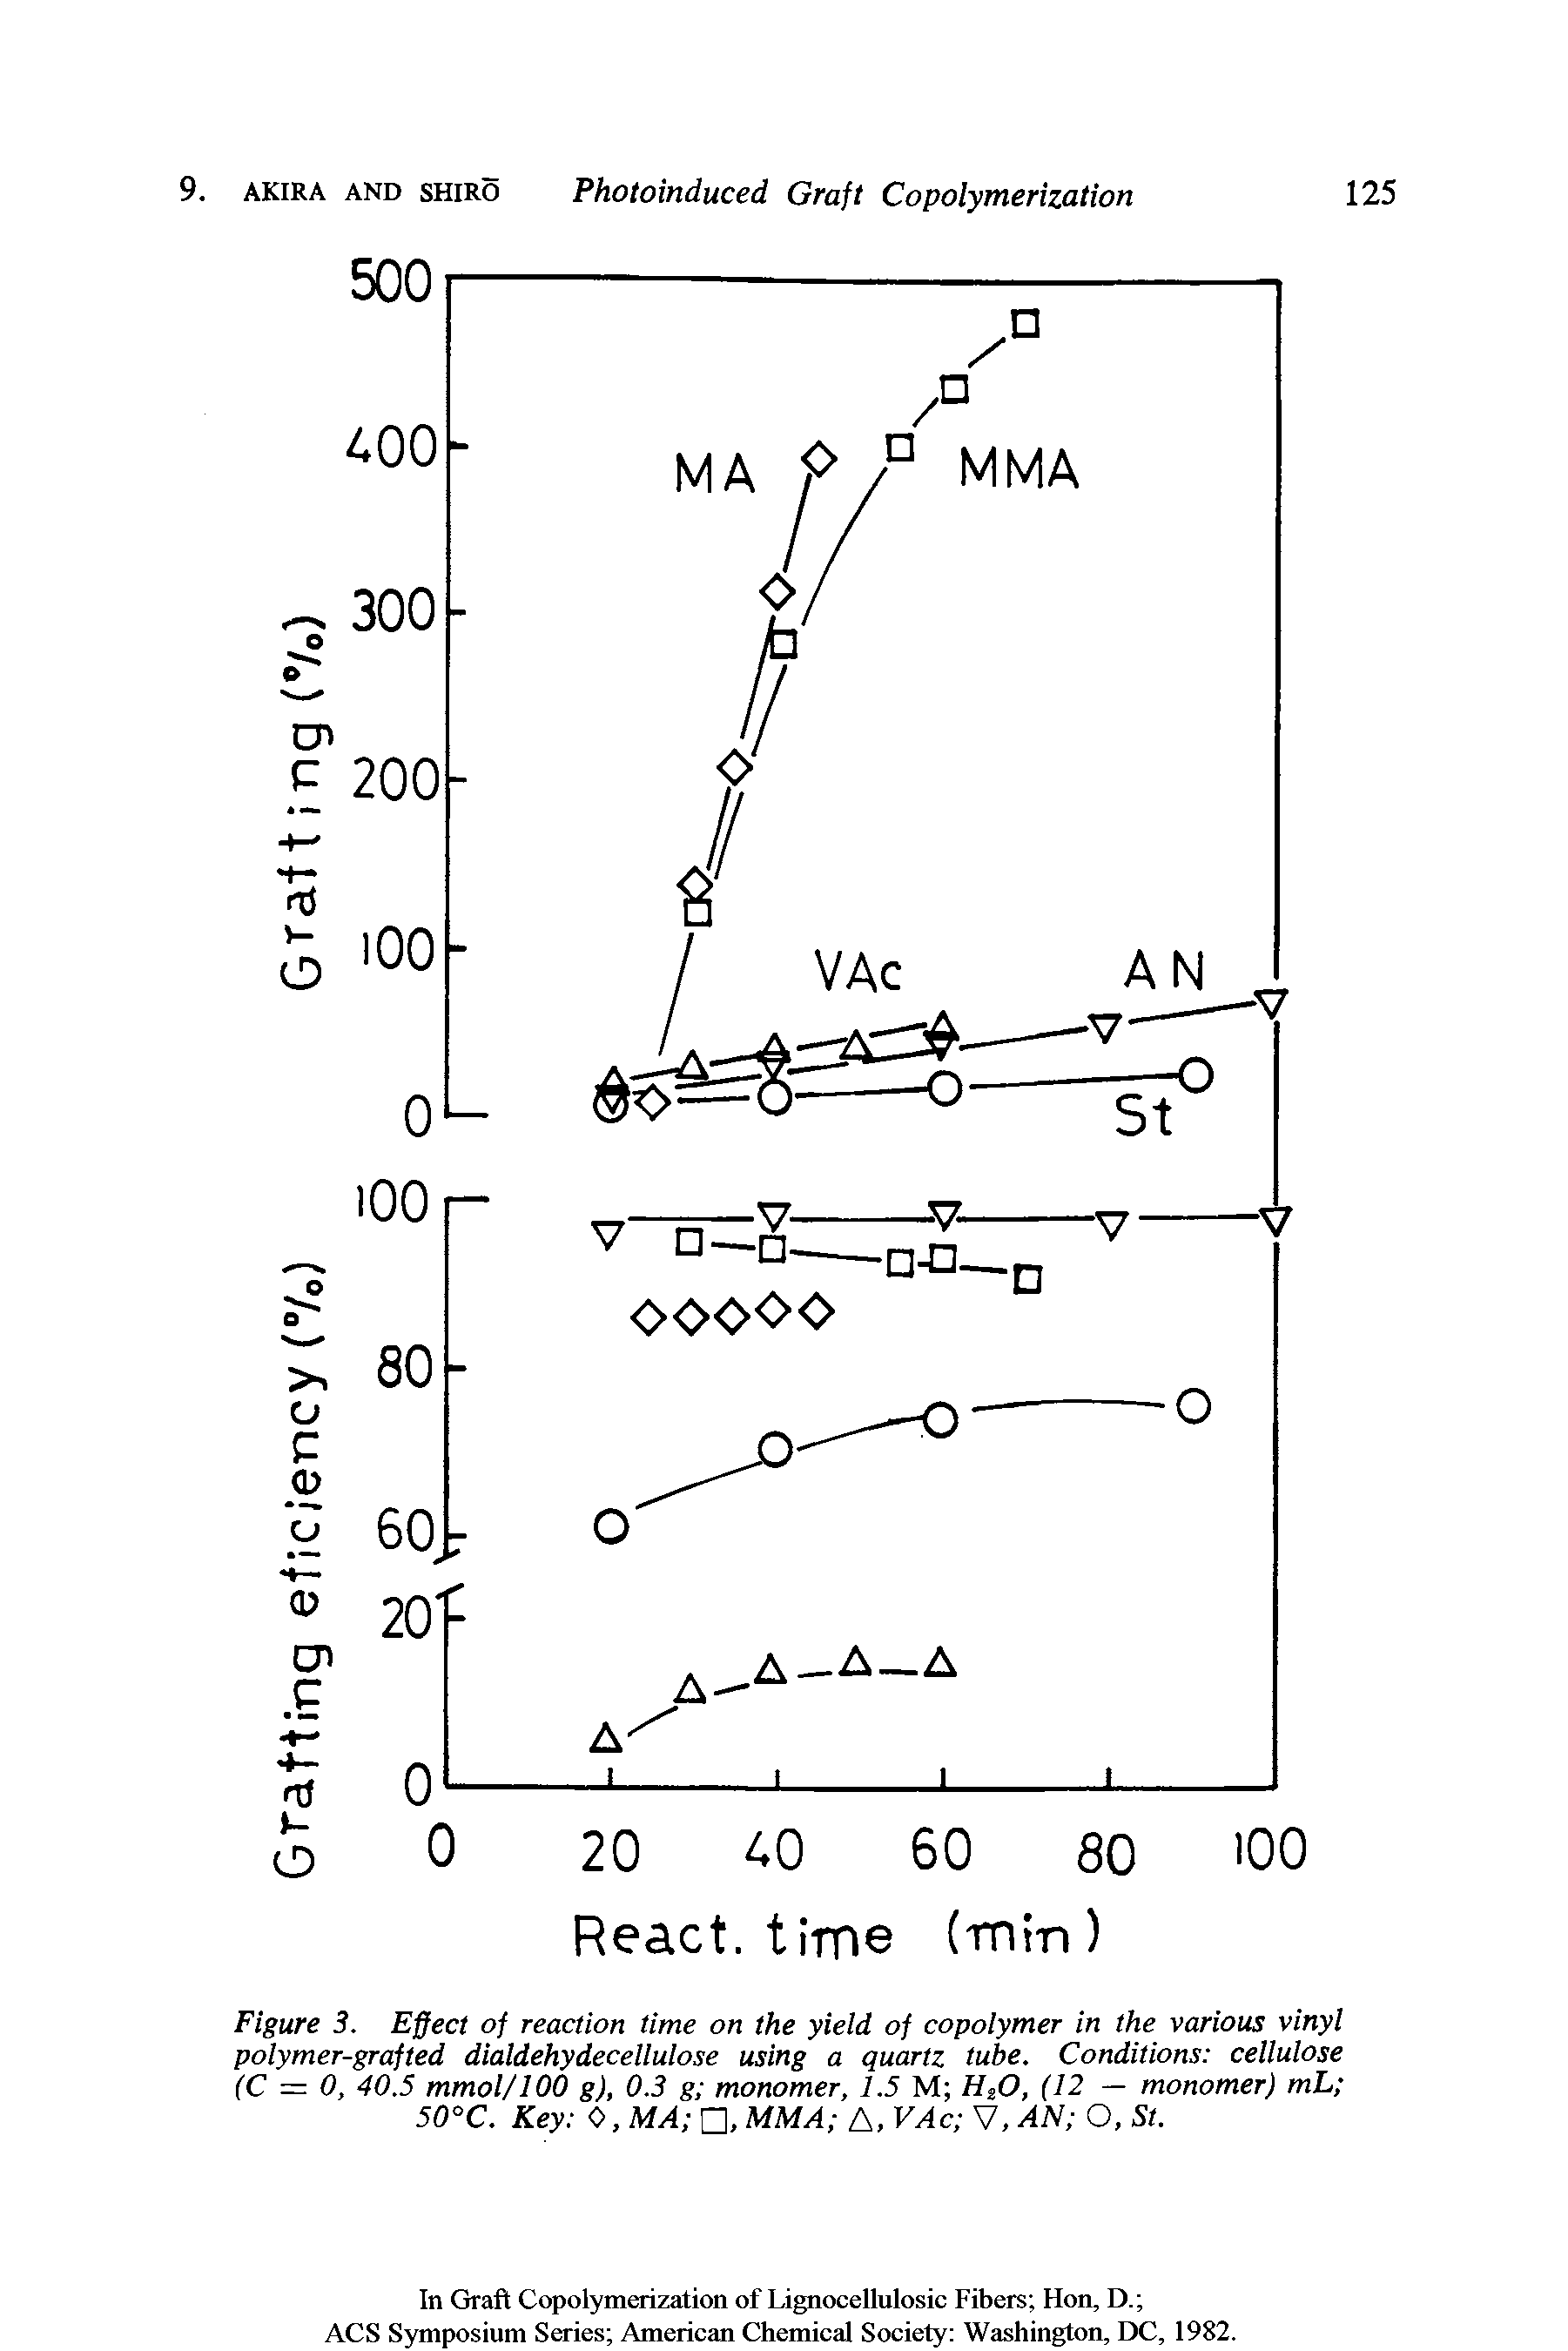 Figure 3. Effect of reaction time on the yield of copolymer in the various vinyl polymer-grafted dialdehydecellulose using a quartz tube. Conditions cellulose (C = 0, 40.5 mmoi/100 g), 0.3 g monomer, 1.5 M H20, (12 — monomer) mL 50°C. Key 0, MA , MMA A, VAc V, AN O, St.